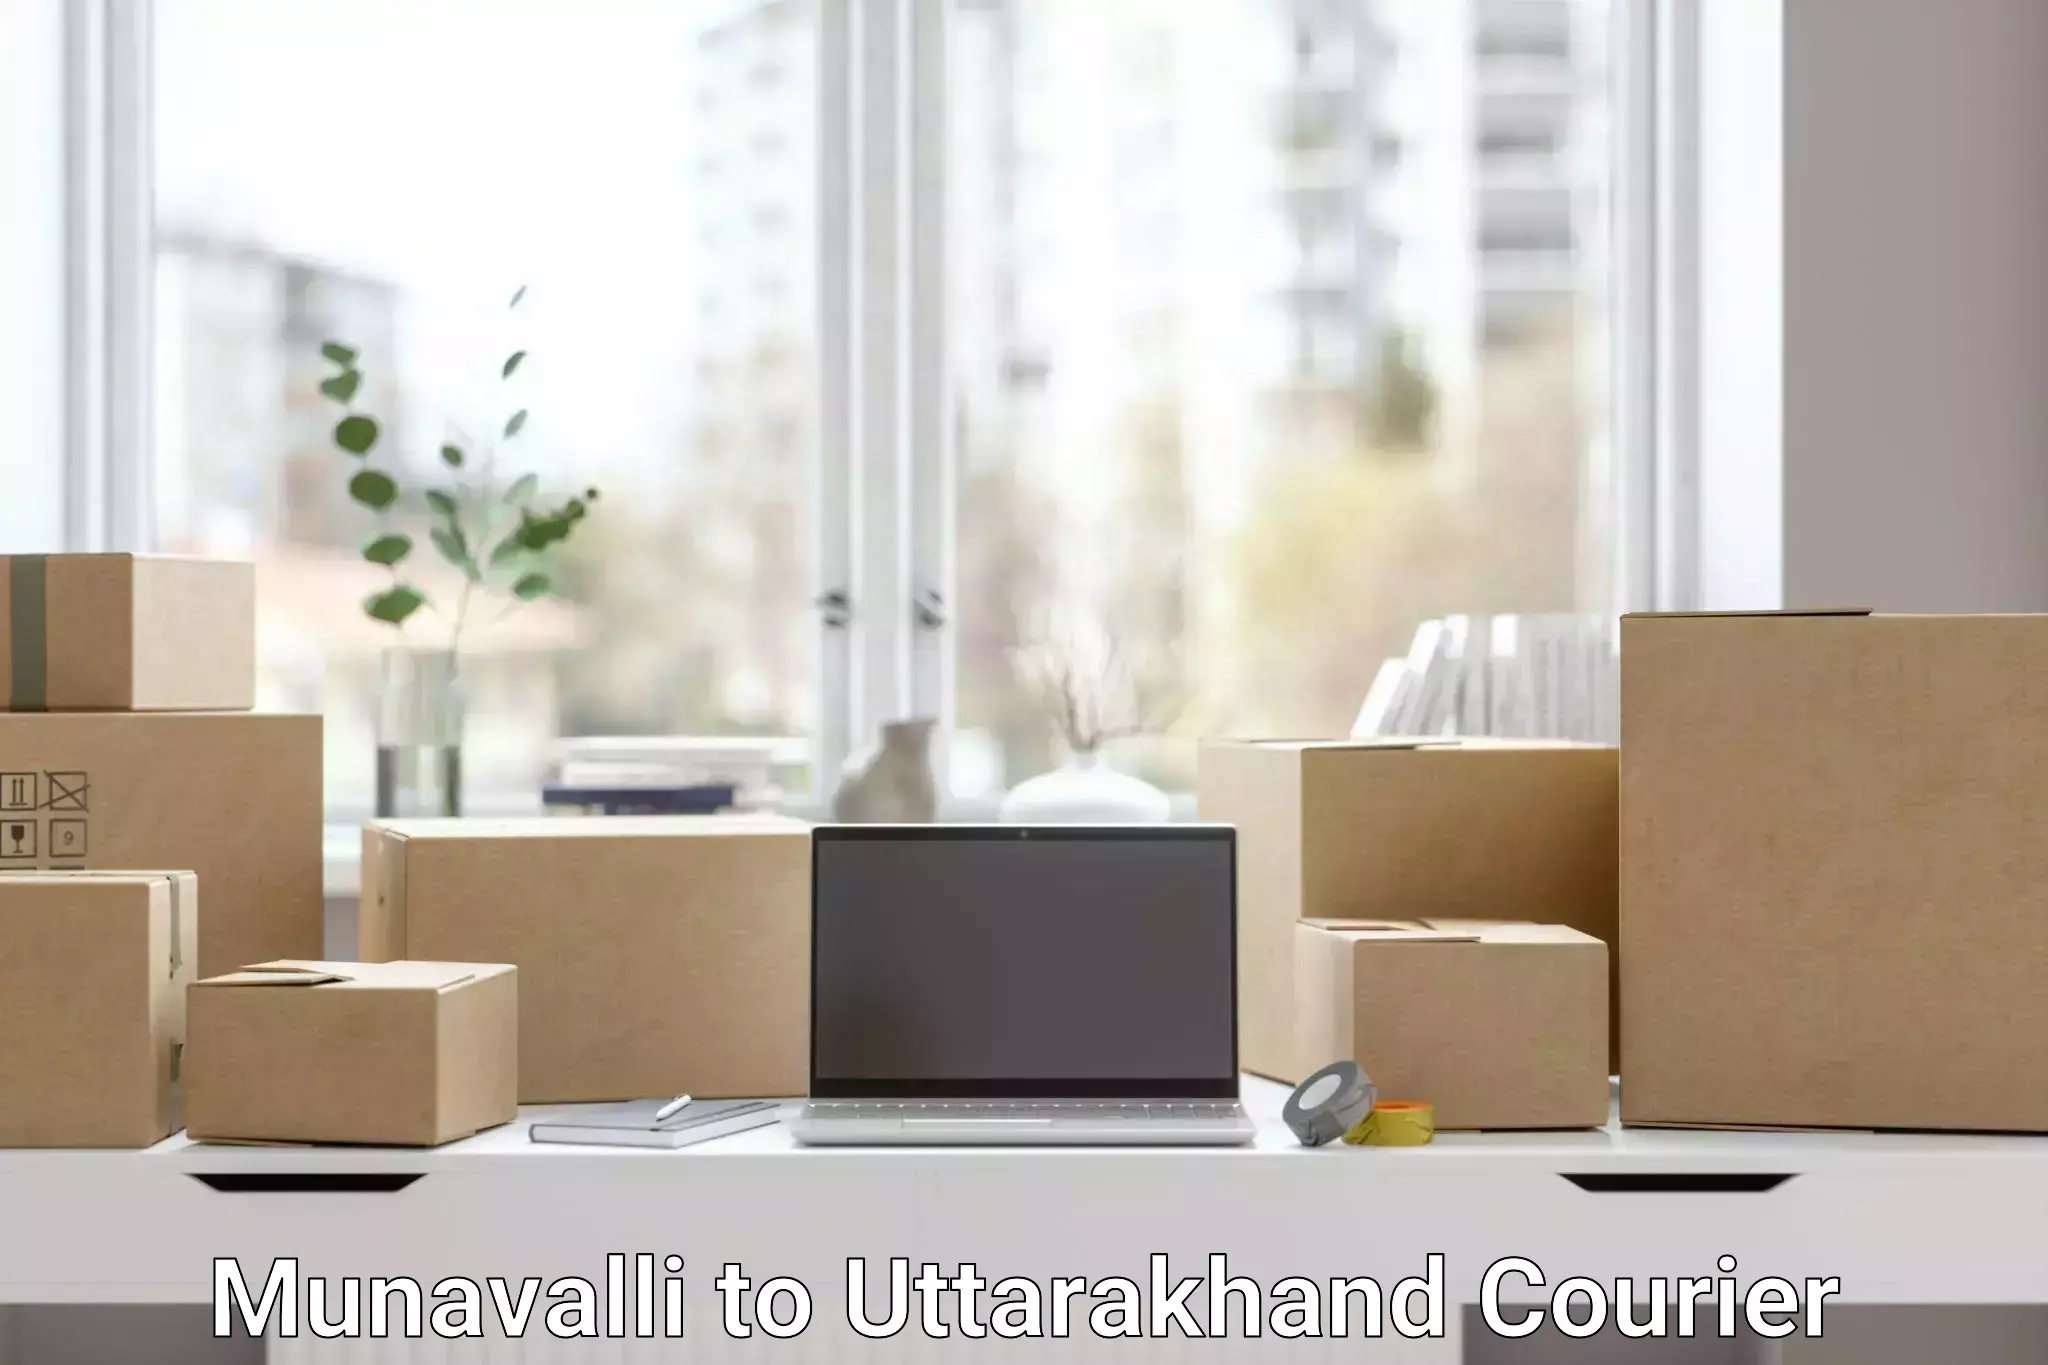 Cost-effective courier solutions Munavalli to Doiwala